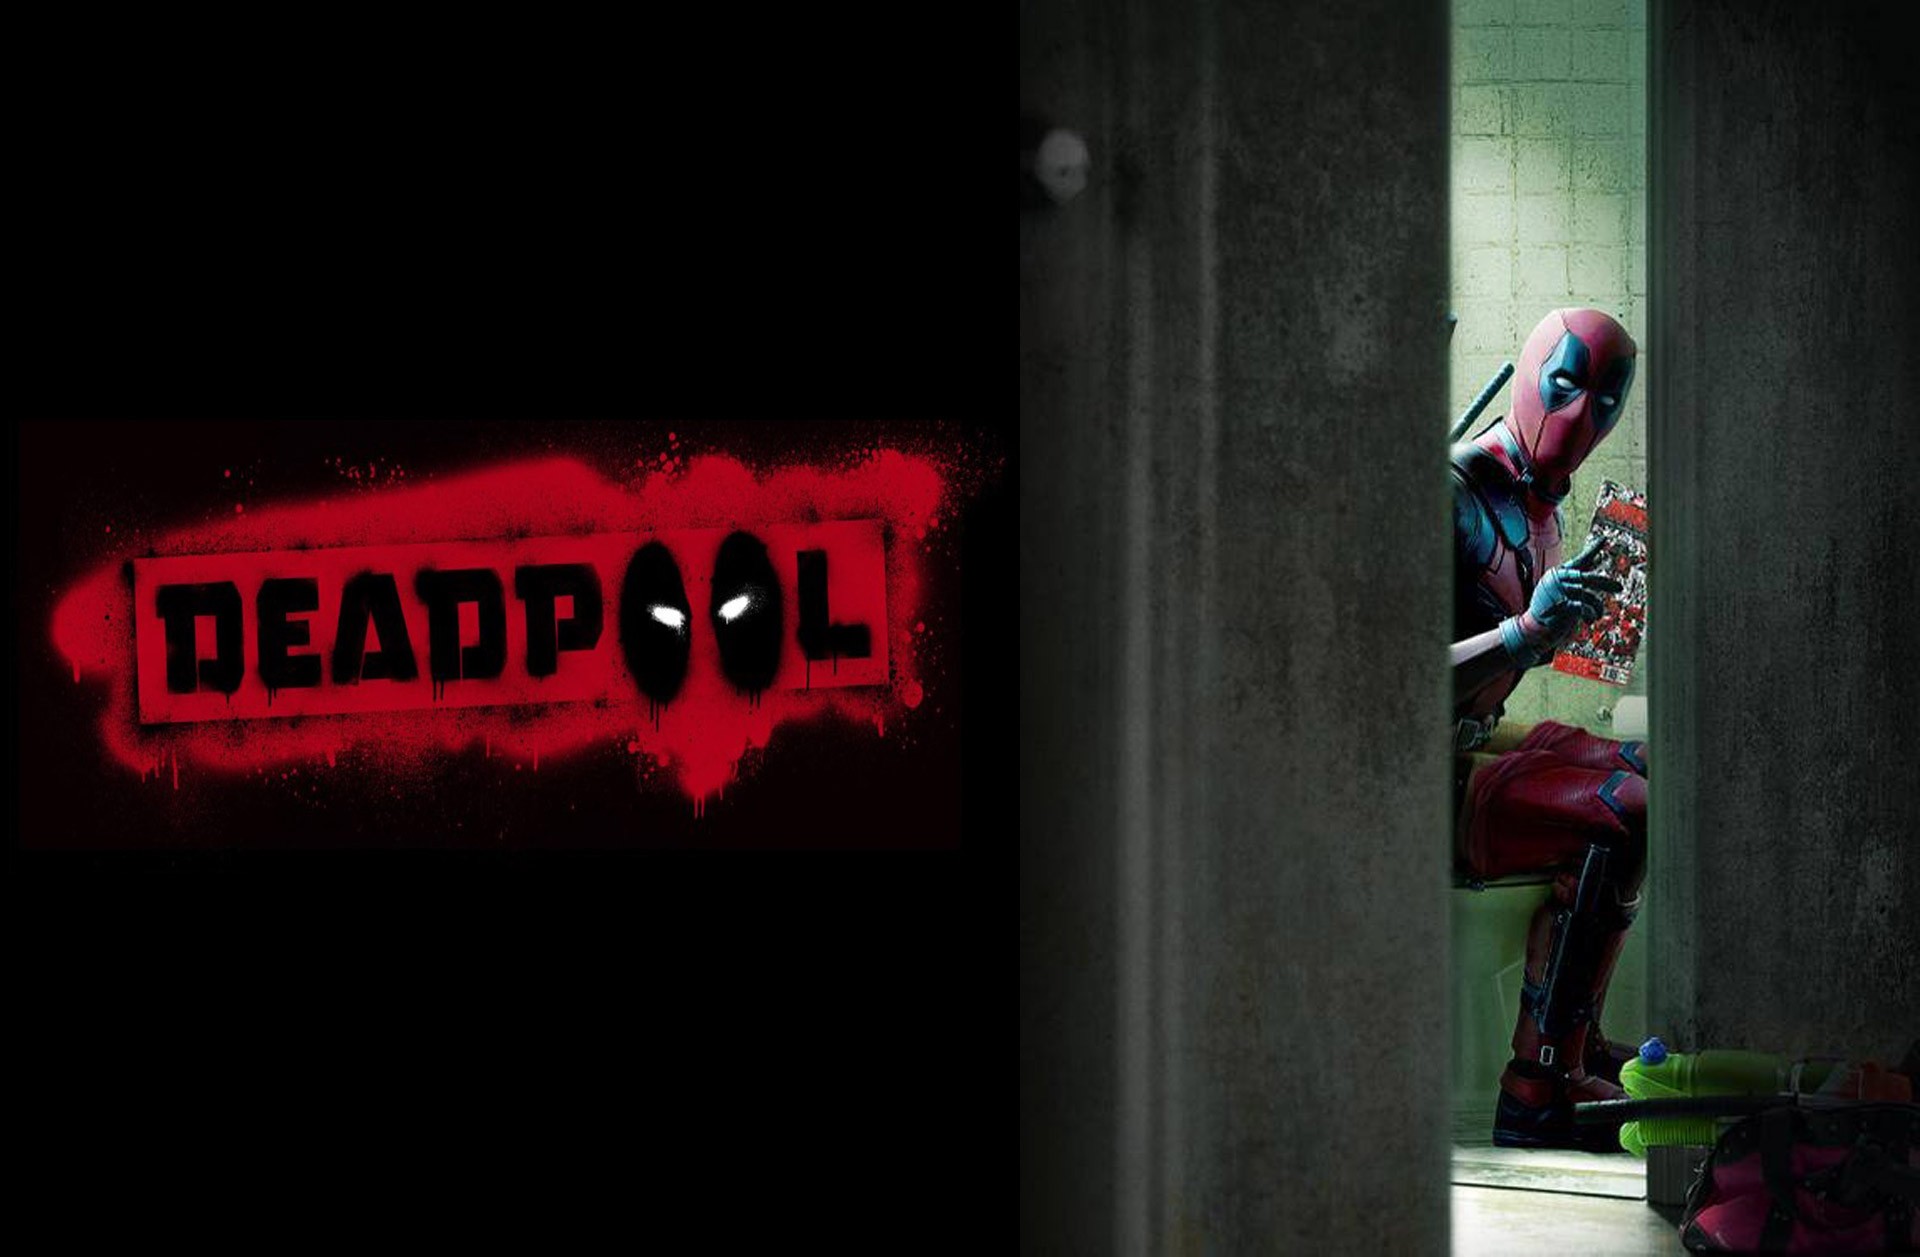 Deadpool Trailer Fanboy tested Wifepool approved